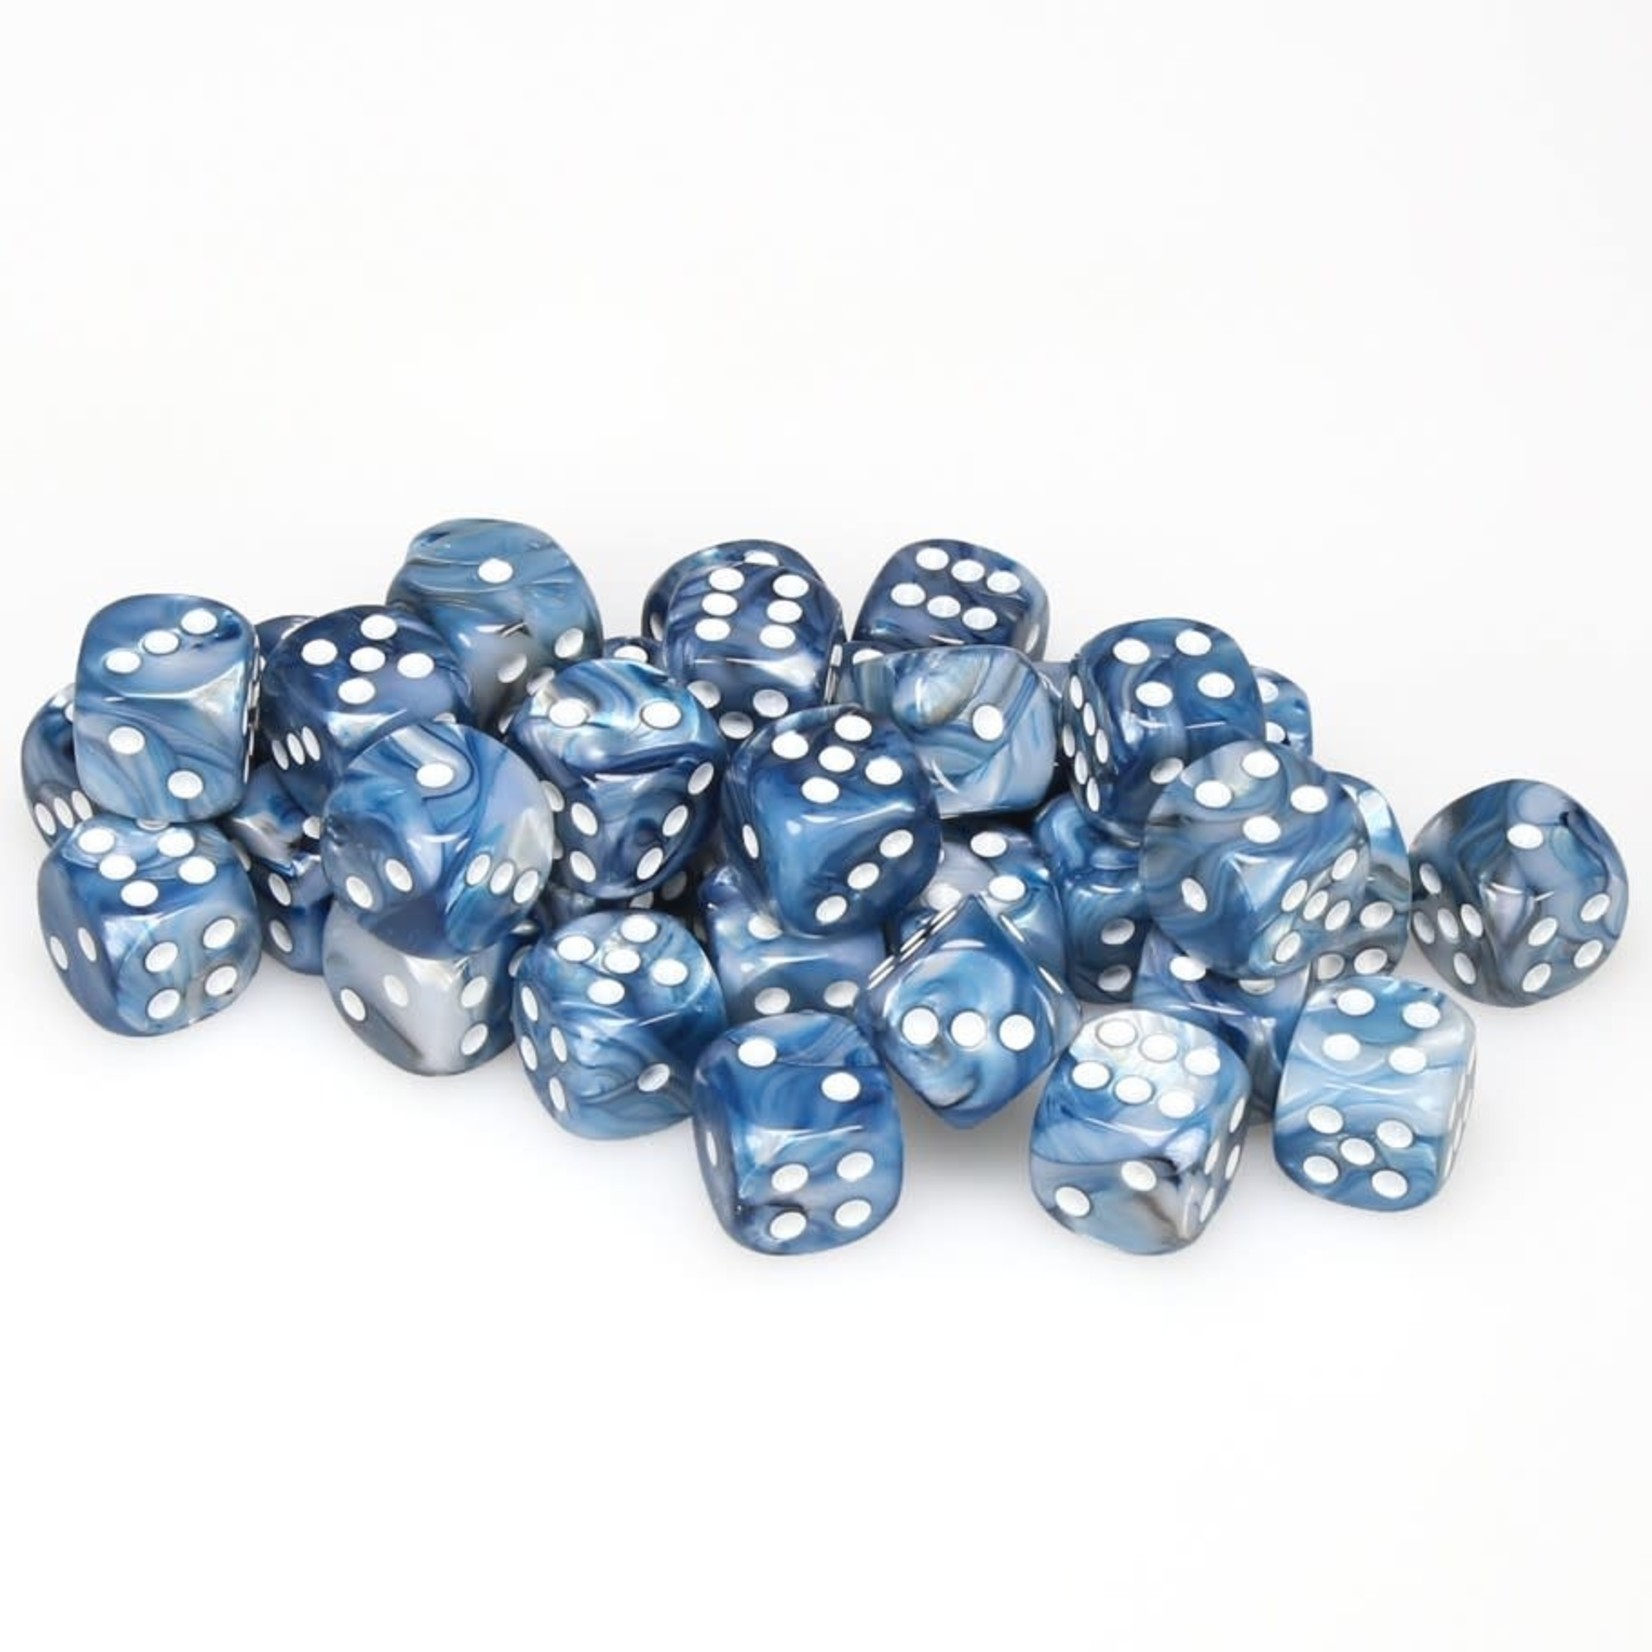 Chessex Chessex Lustrous Slate with White 12 mm d6 36 die set